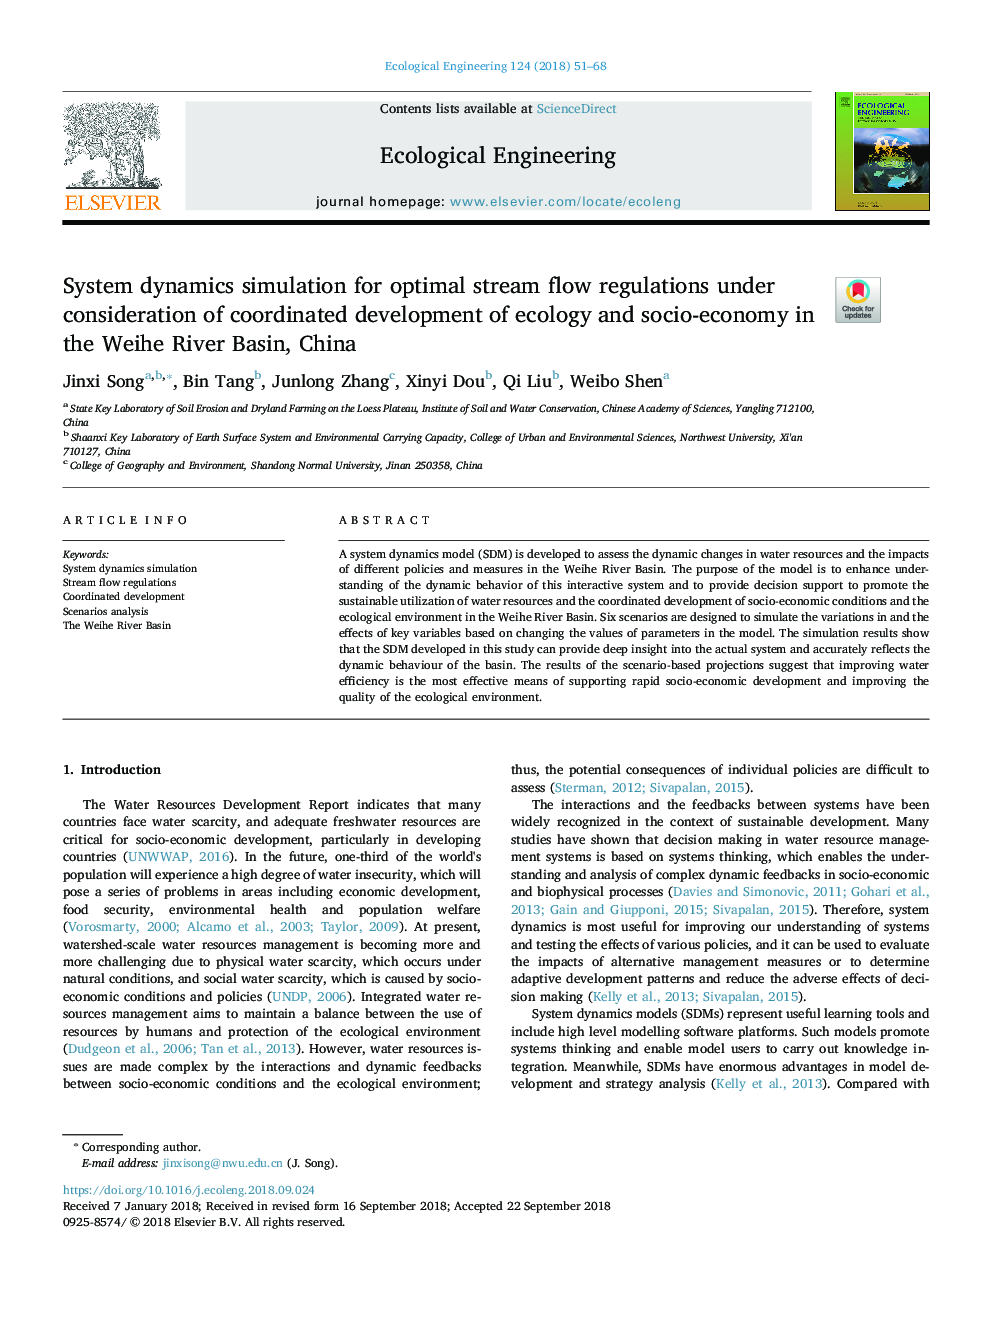 System dynamics simulation for optimal stream flow regulations under consideration of coordinated development of ecology and socio-economy in the Weihe River Basin, China